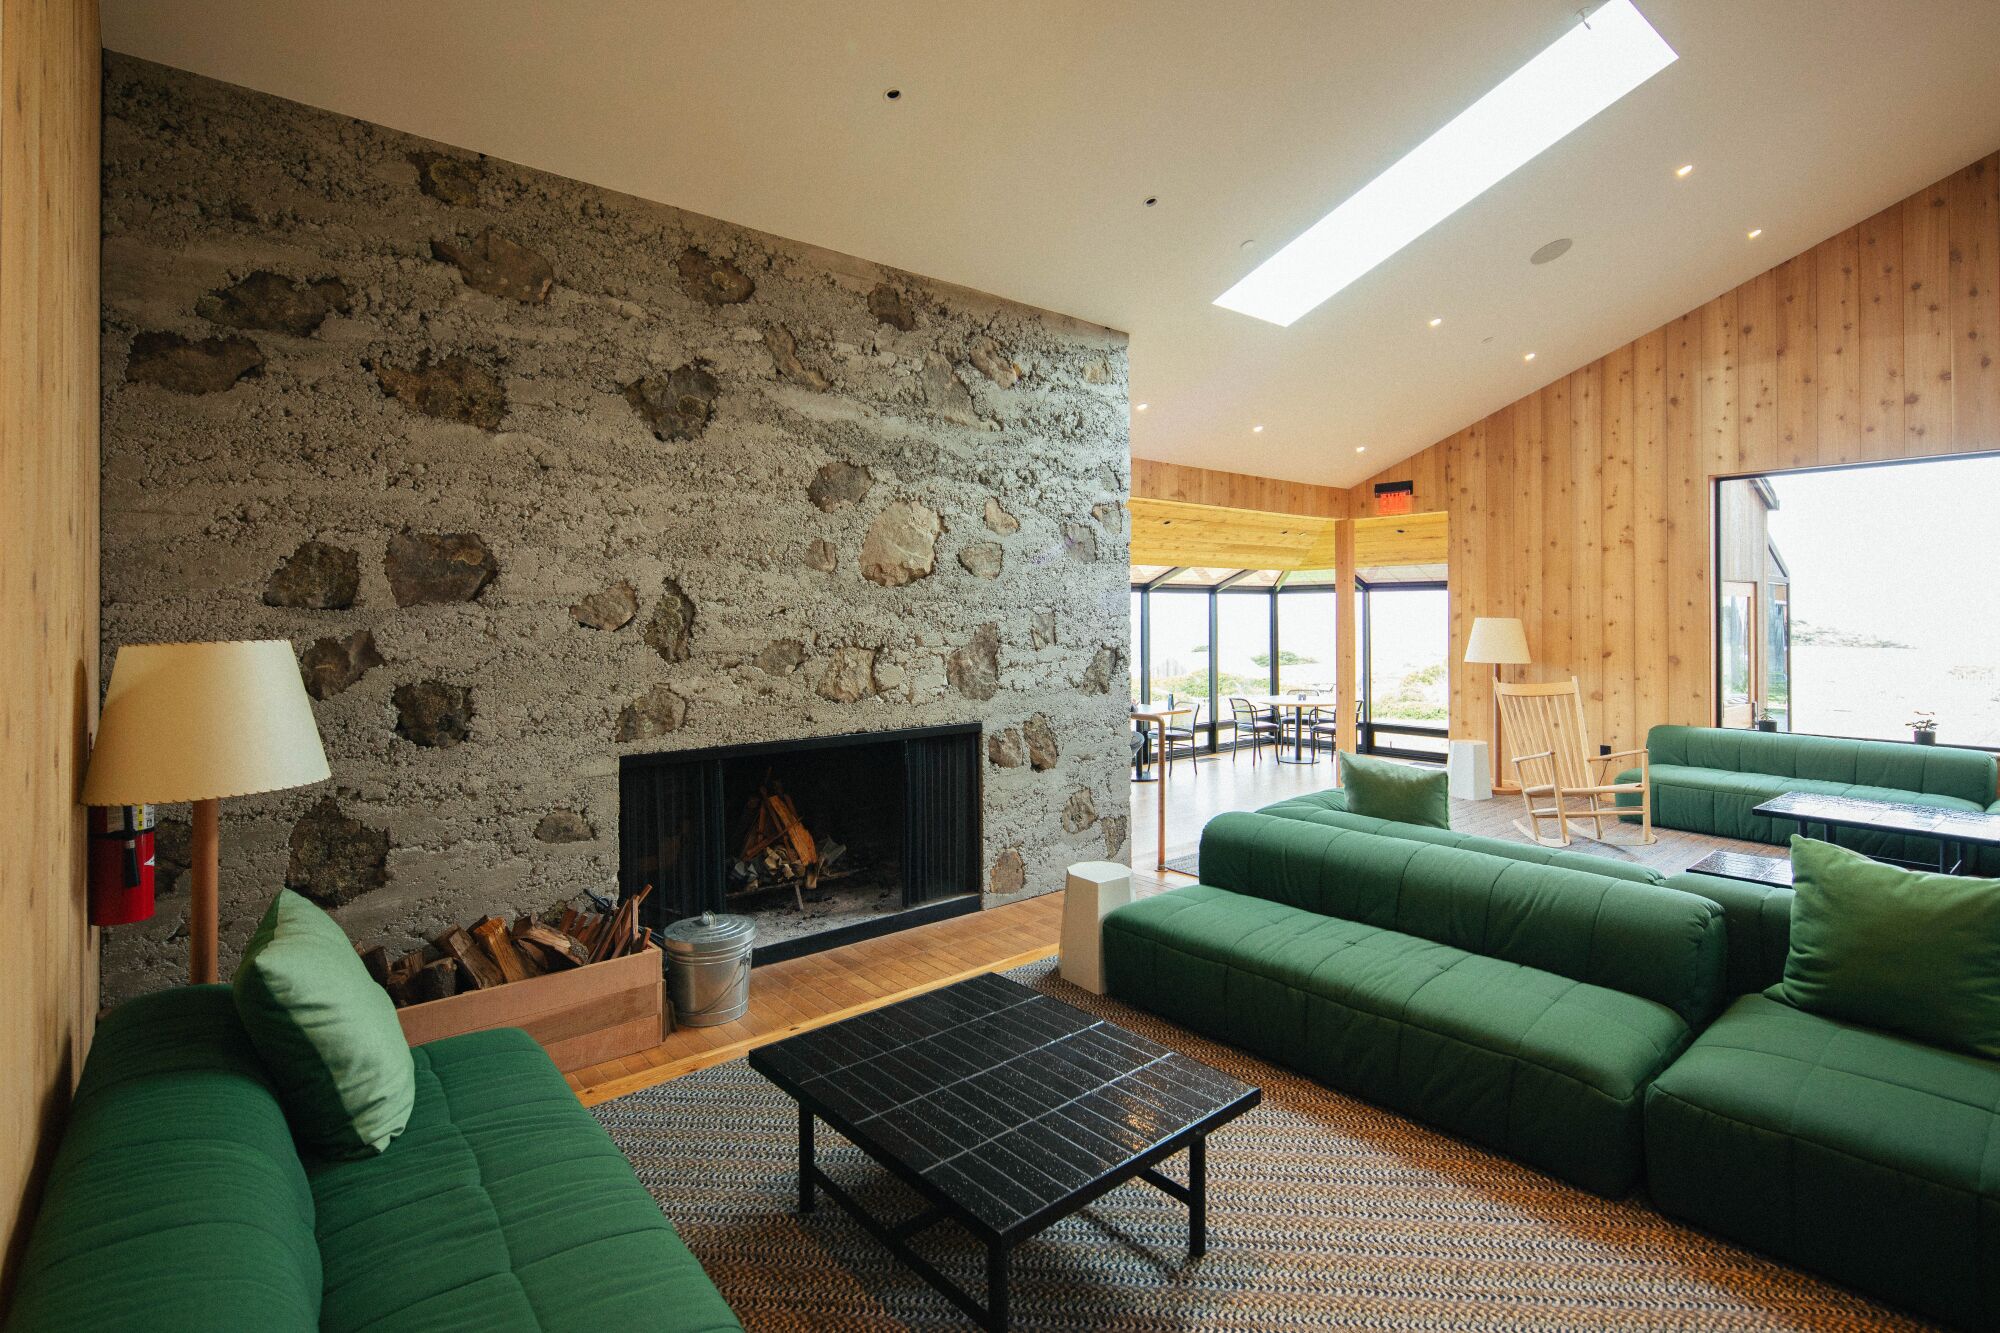 A room with wood walls, a large stone fireplace and green couches.